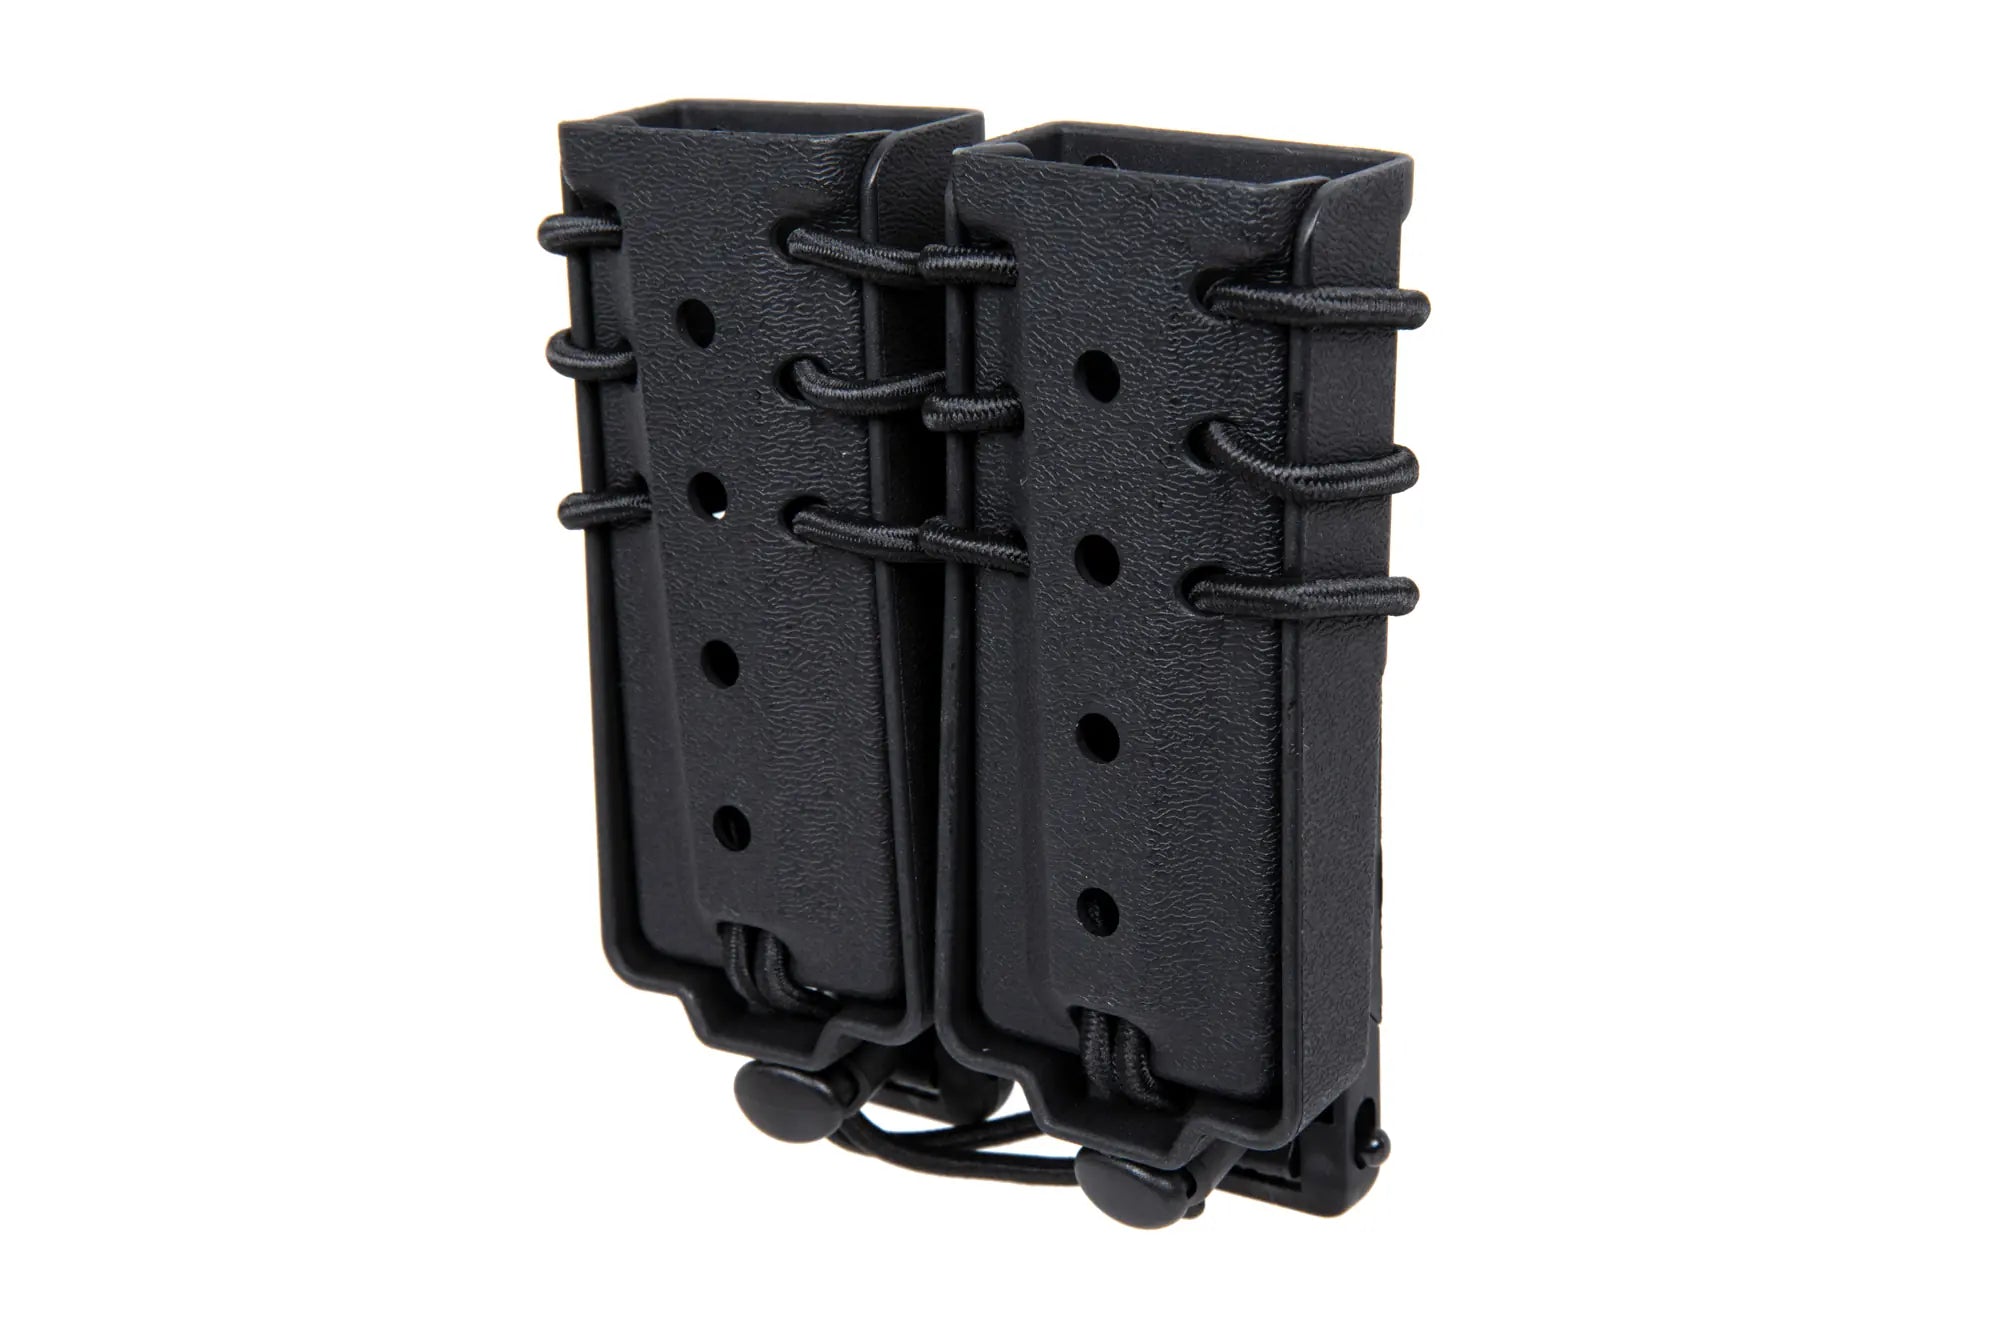 Carrier for 2 9mm magazines Wosport Urban Assault Long Quick Pull Black